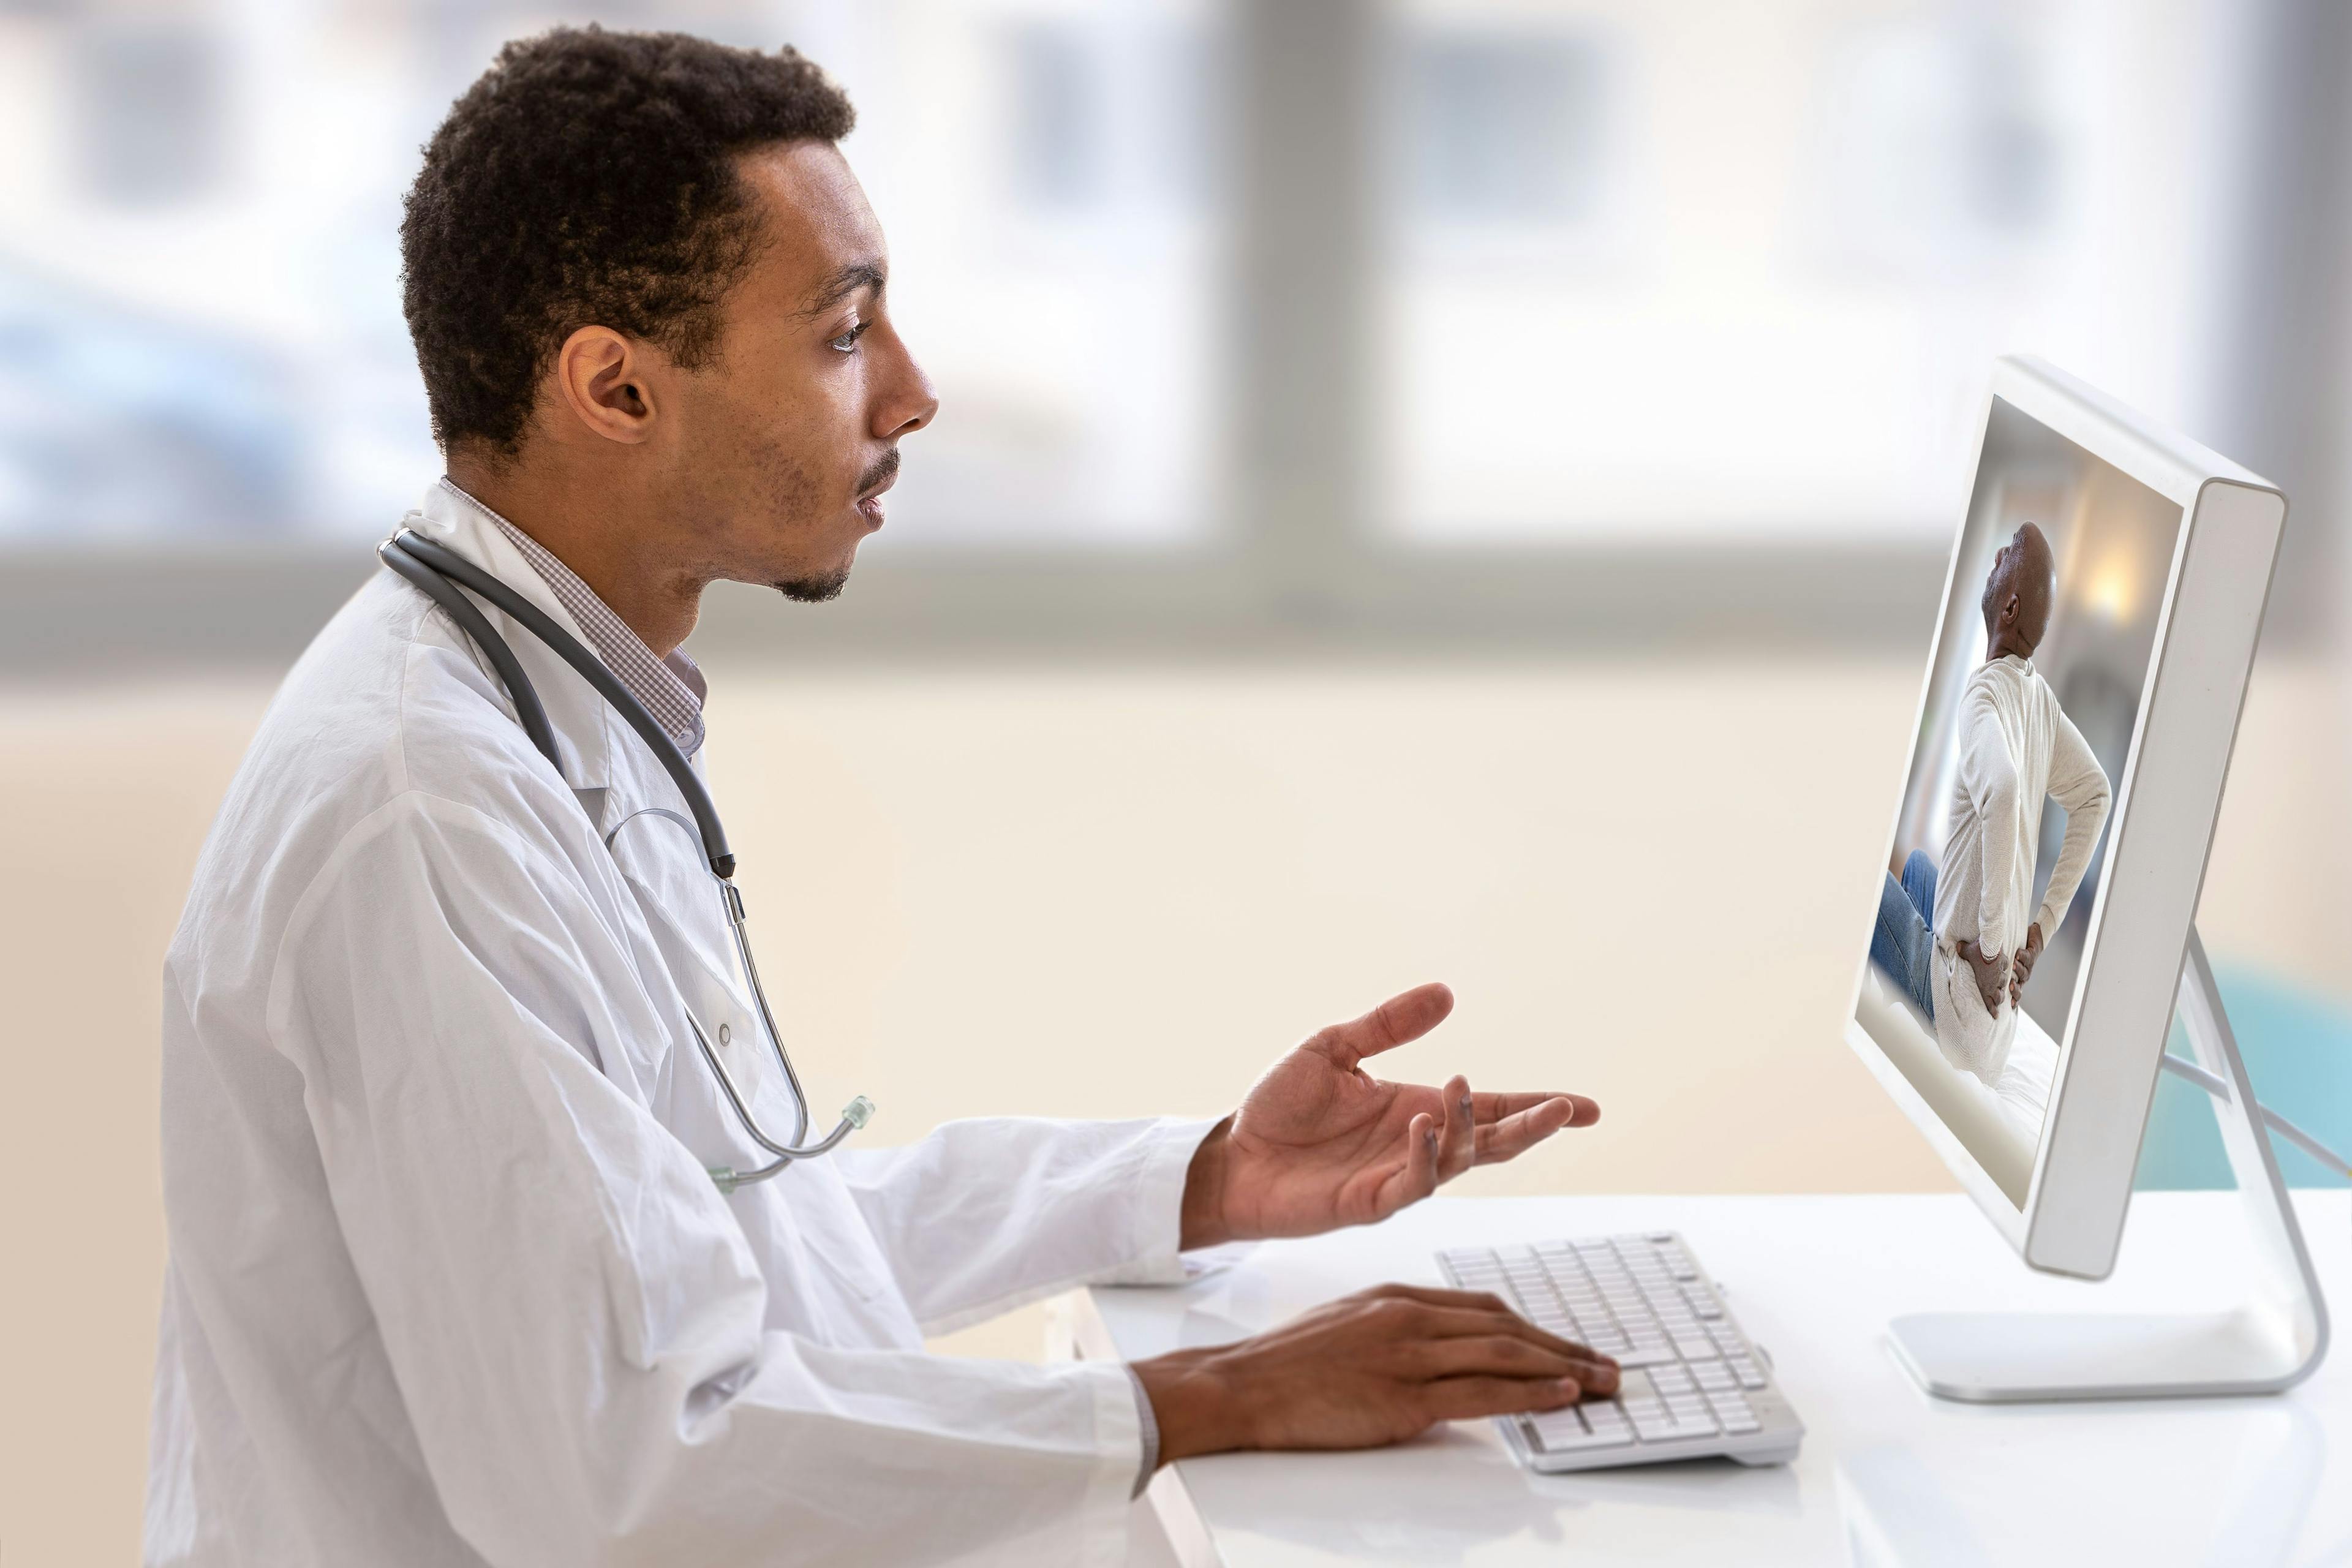 POLL: Did you use telemedicine before or after the start of the pandemic?